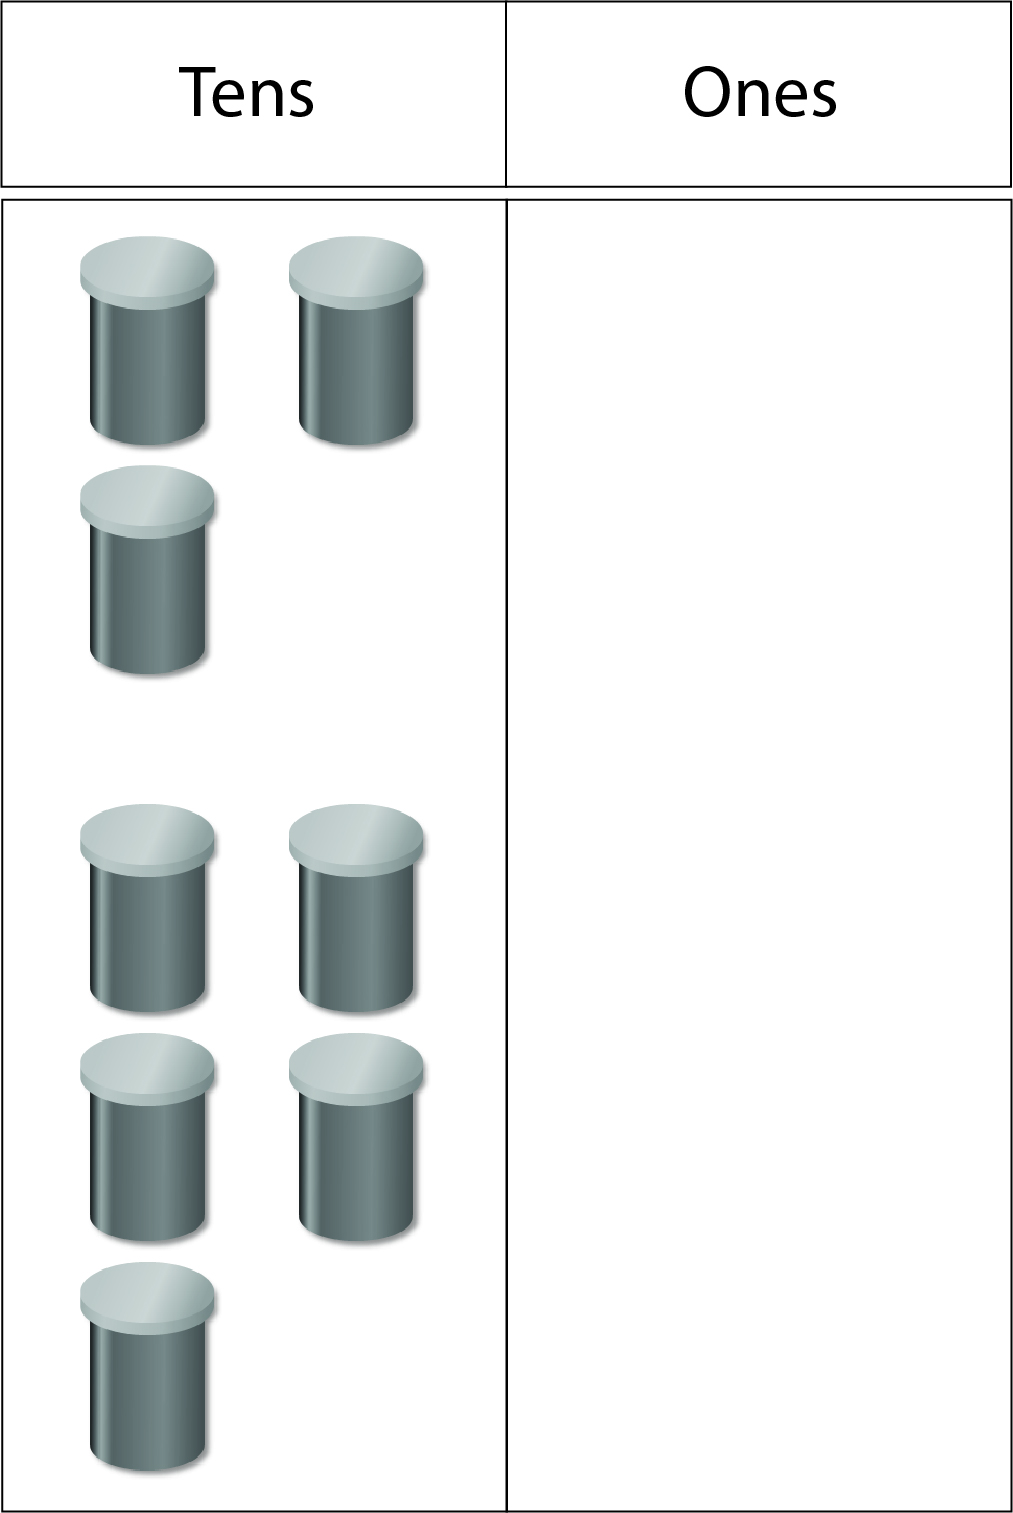 Image of a two-column (tens and ones) place value board displaying 8 ten-bean canisters in a tens column. The canisters are grouped as a group of 3 and a group of 5.